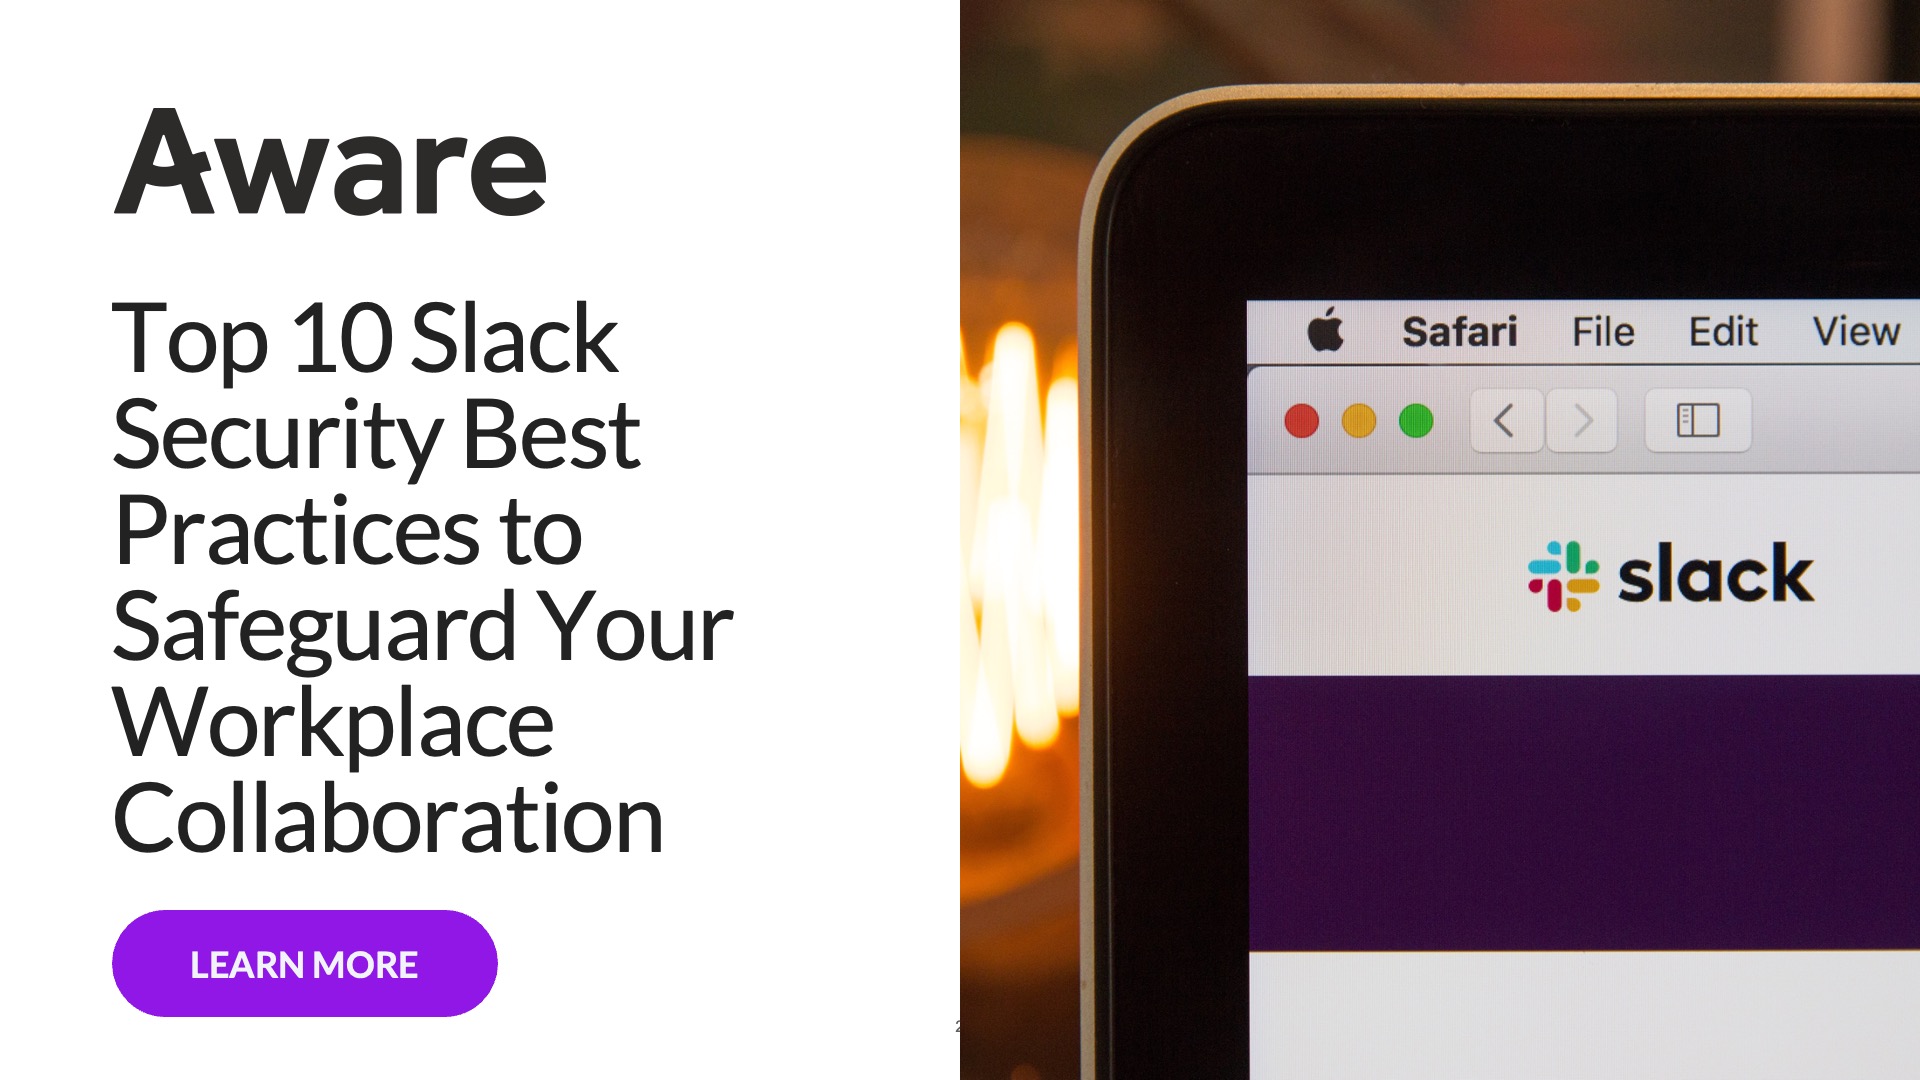 Top 10 Slack Security Best Practices to Safeguard Your Workplace Collaboration